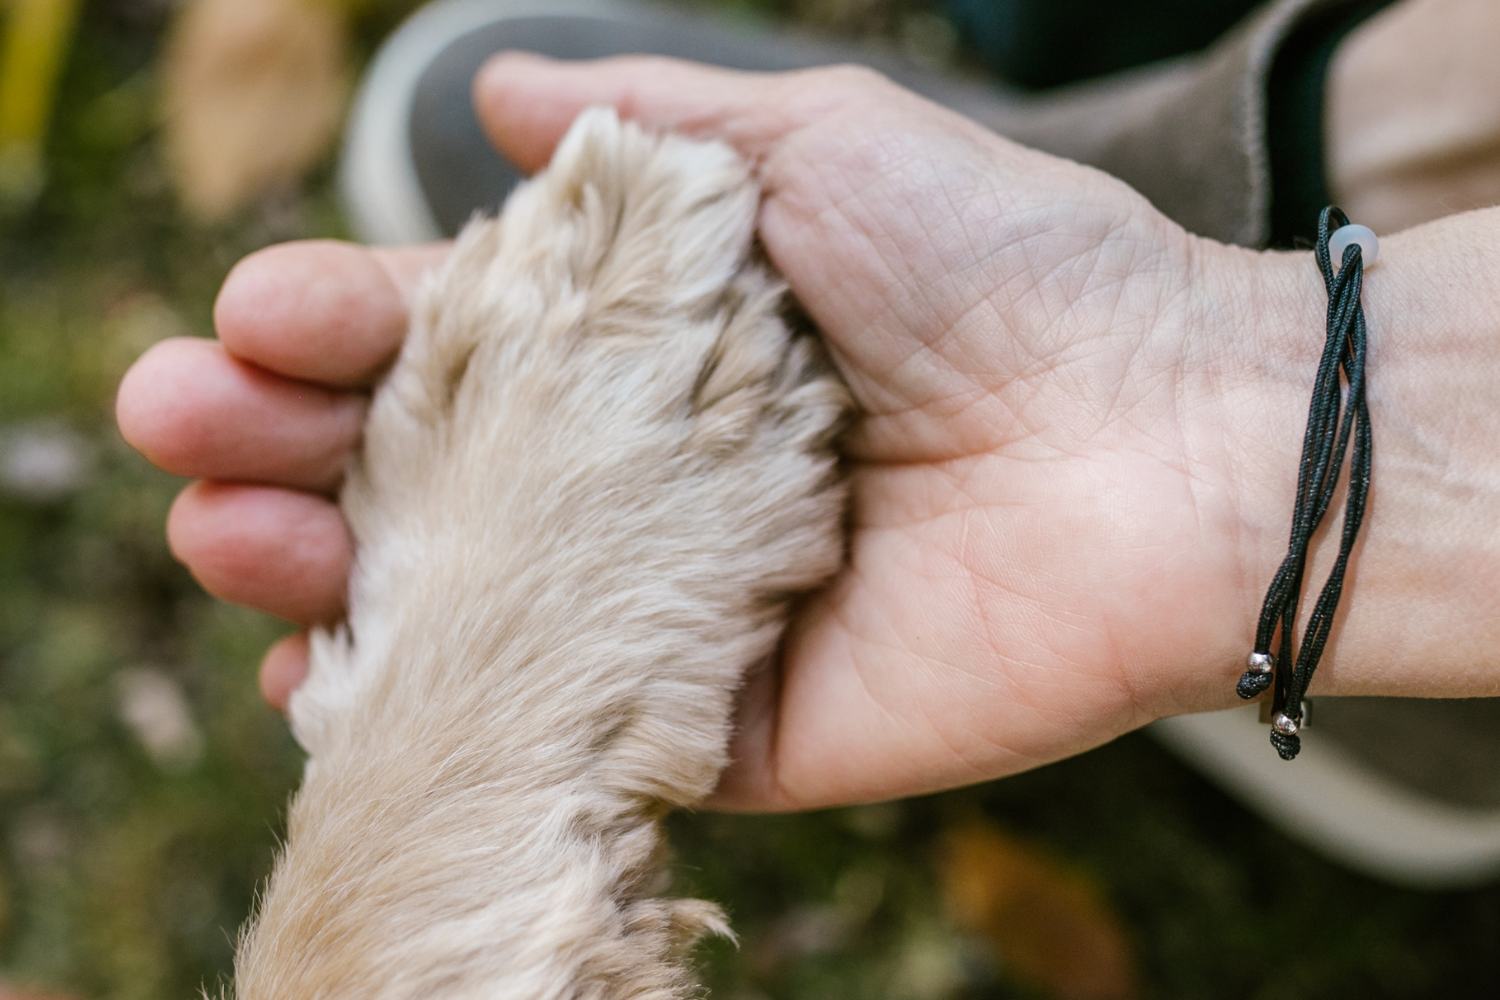 How to Help Your Local Animal Shelter | Florida Animal Friend